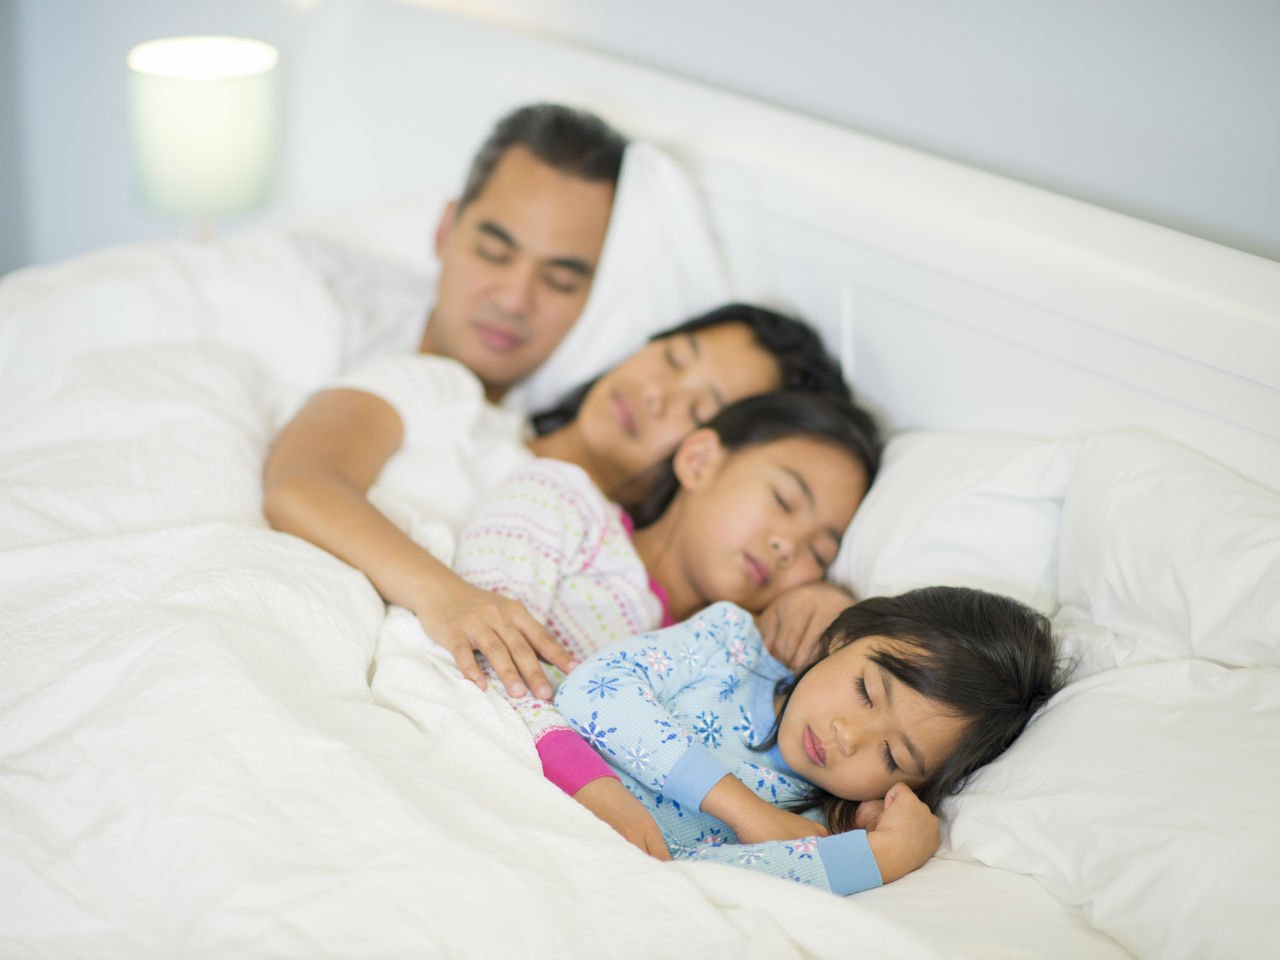 How To Stop Co Sleeping An Age By, How Long Can A Child Sleep On Twin Bed